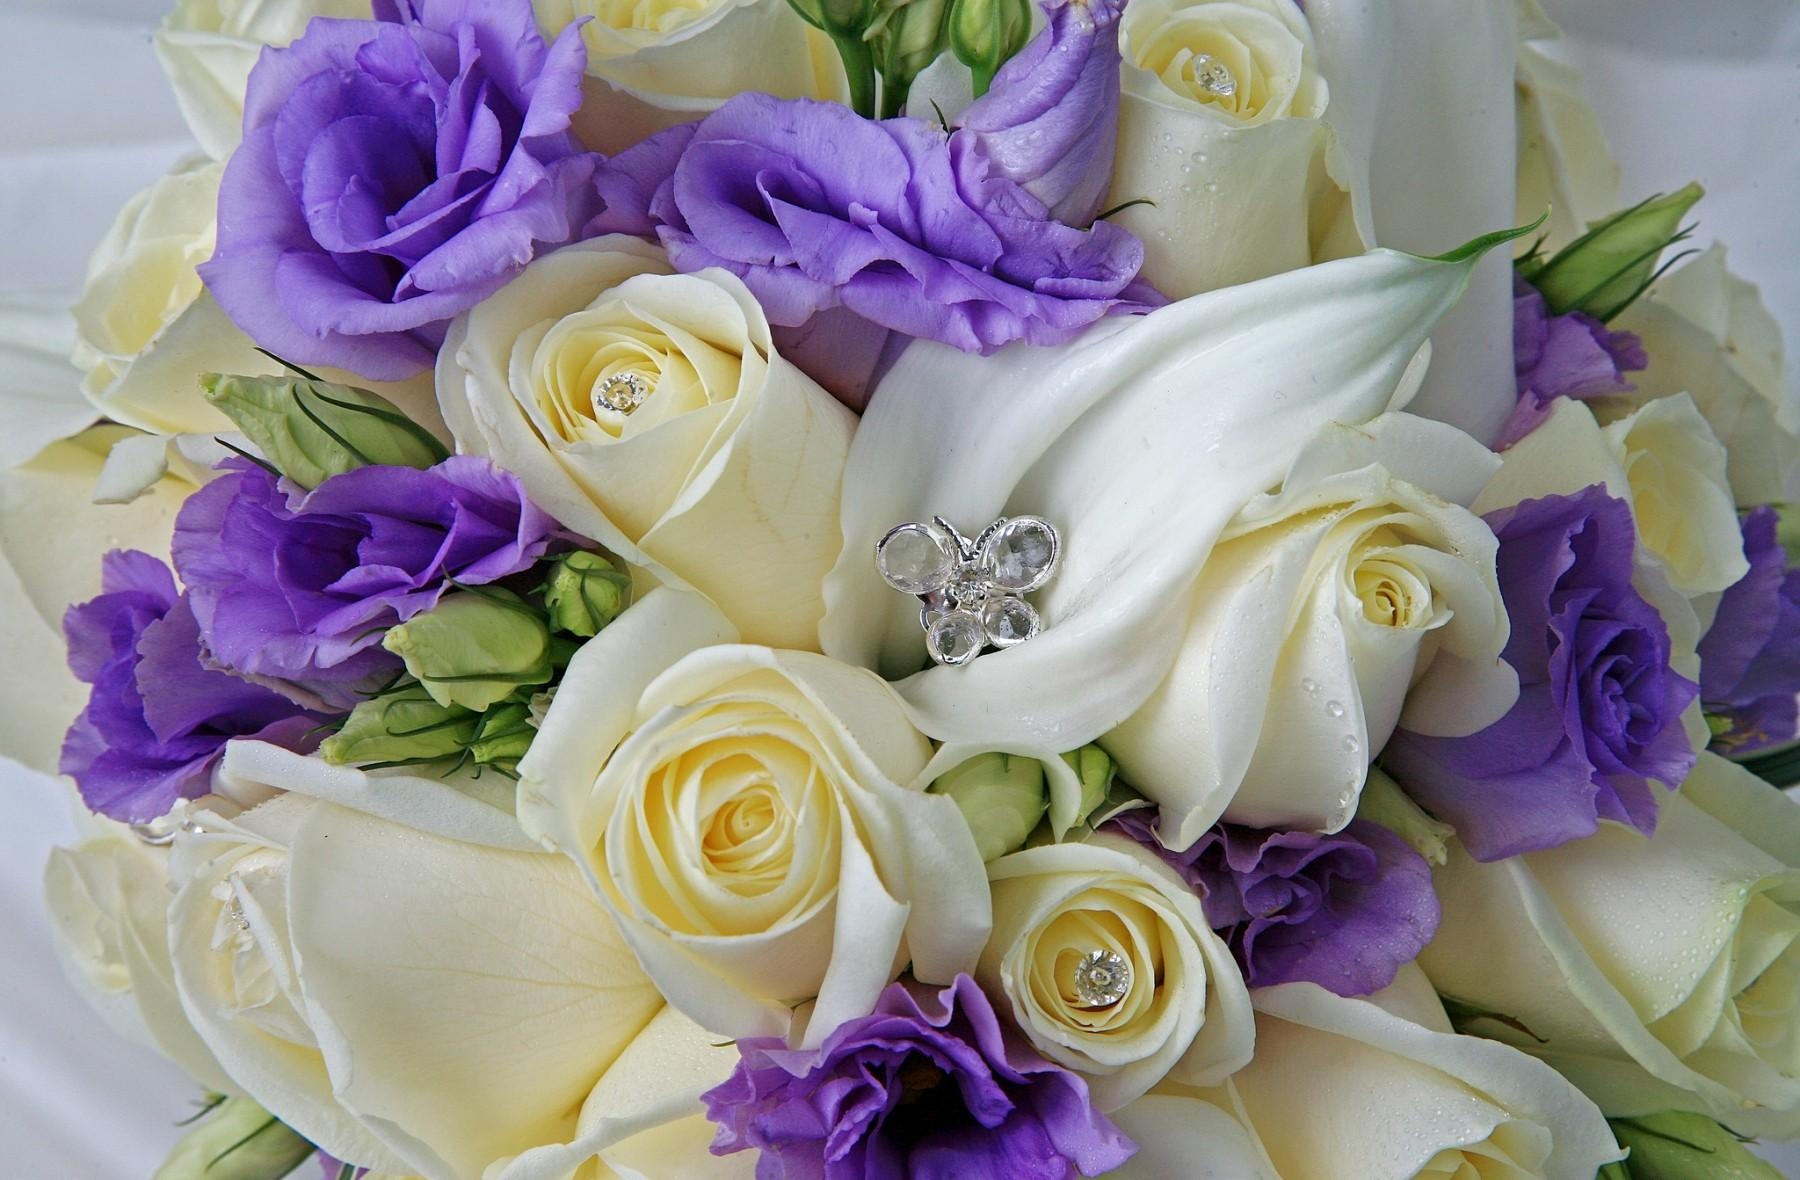 drops, decorations, bouquet, lisianthus russell, roses, lisiantus russell, flowers